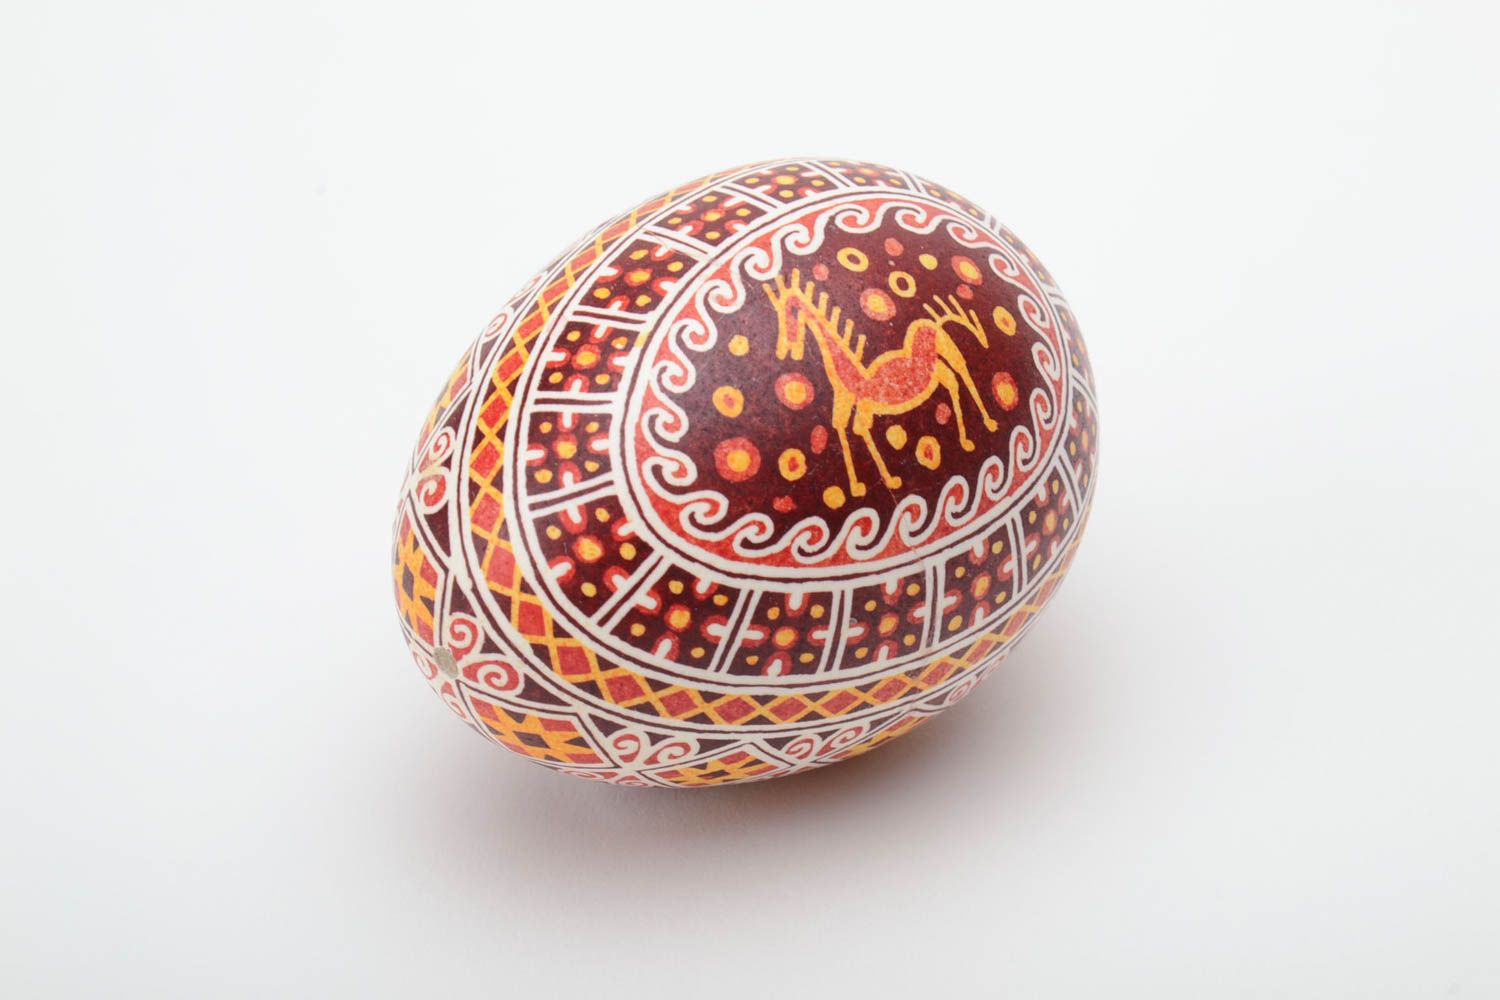 Handmade decorative painted chicken Easter egg with horse image and ornaments photo 2